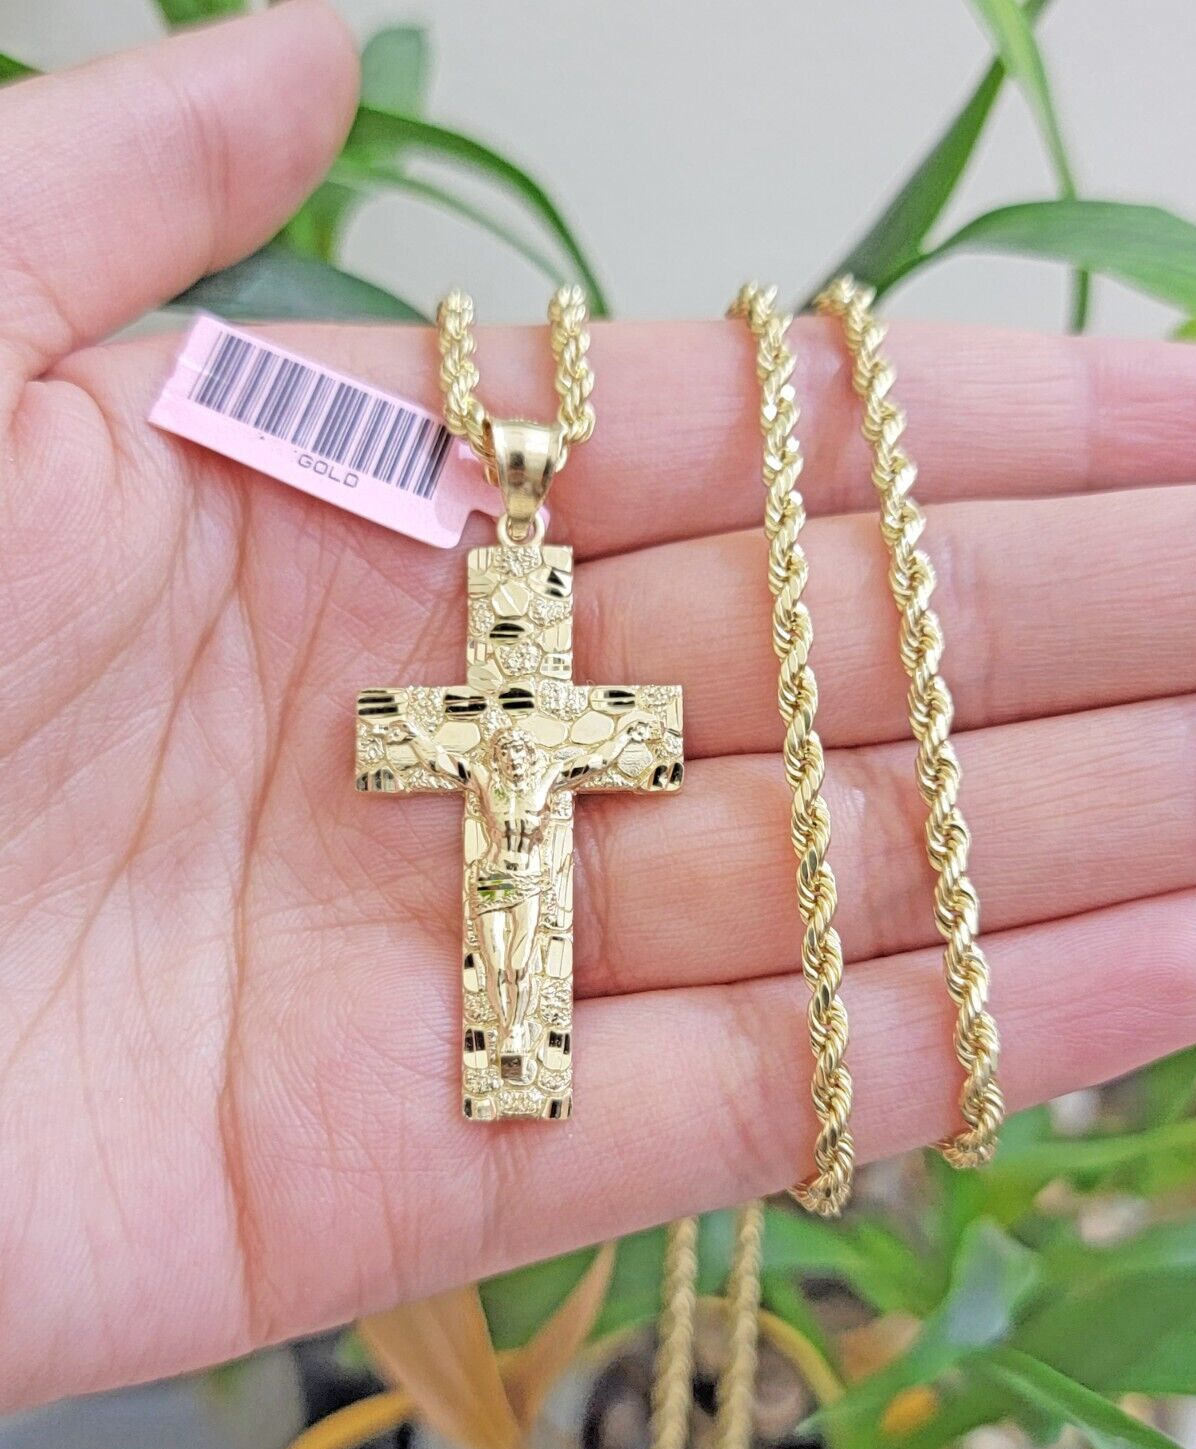 10k Yellow Gold Rope Chain Nugget Cross Charm Set 24 Inch necklace pendant, REAL